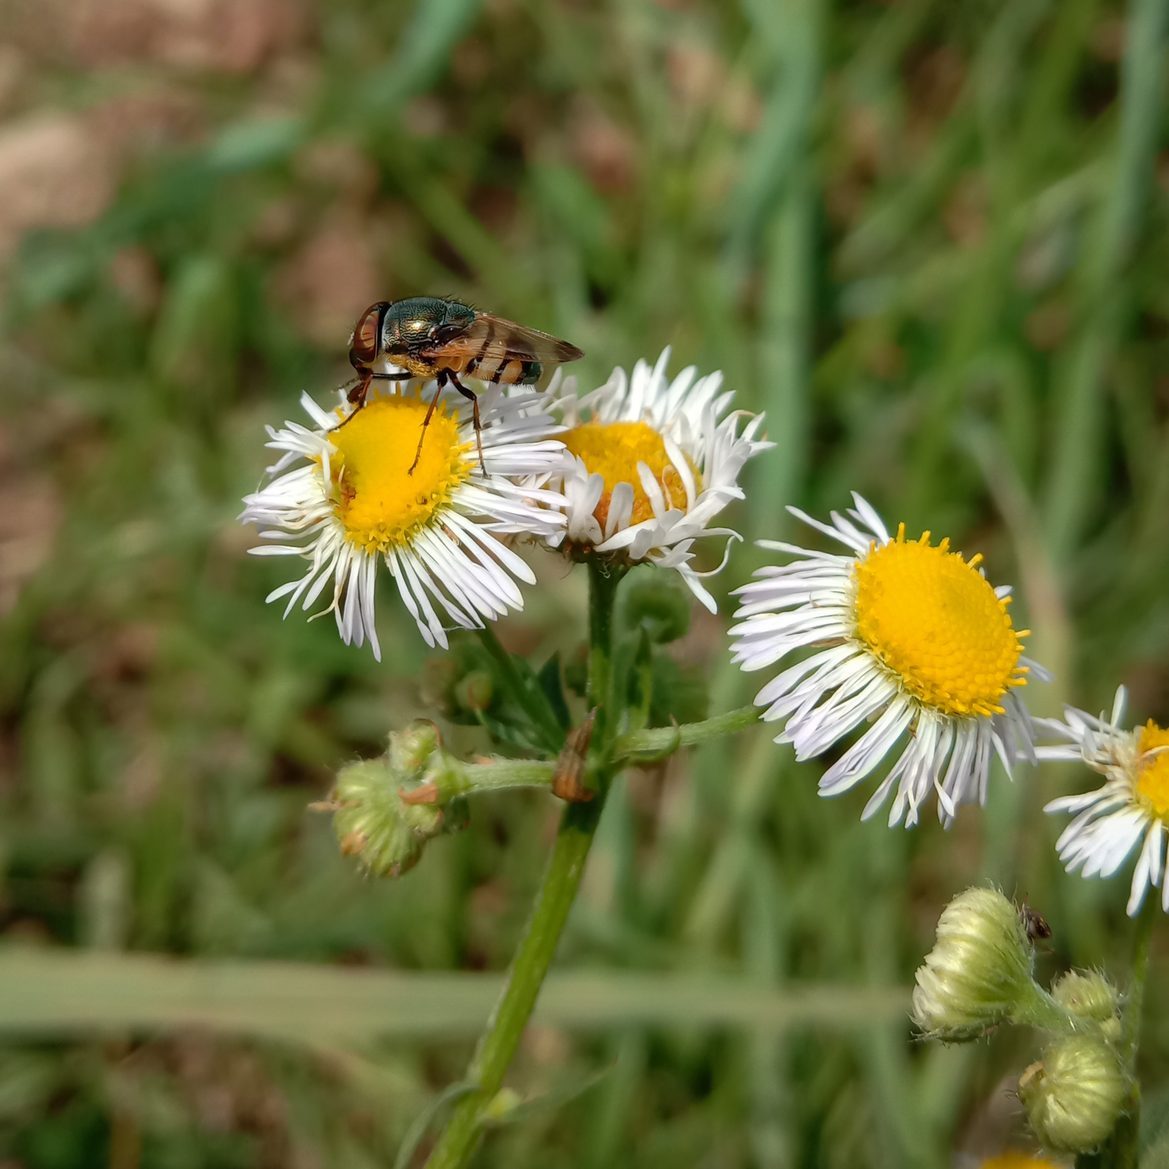 picture of a wild phorid fly sitting on daisy fleabane.